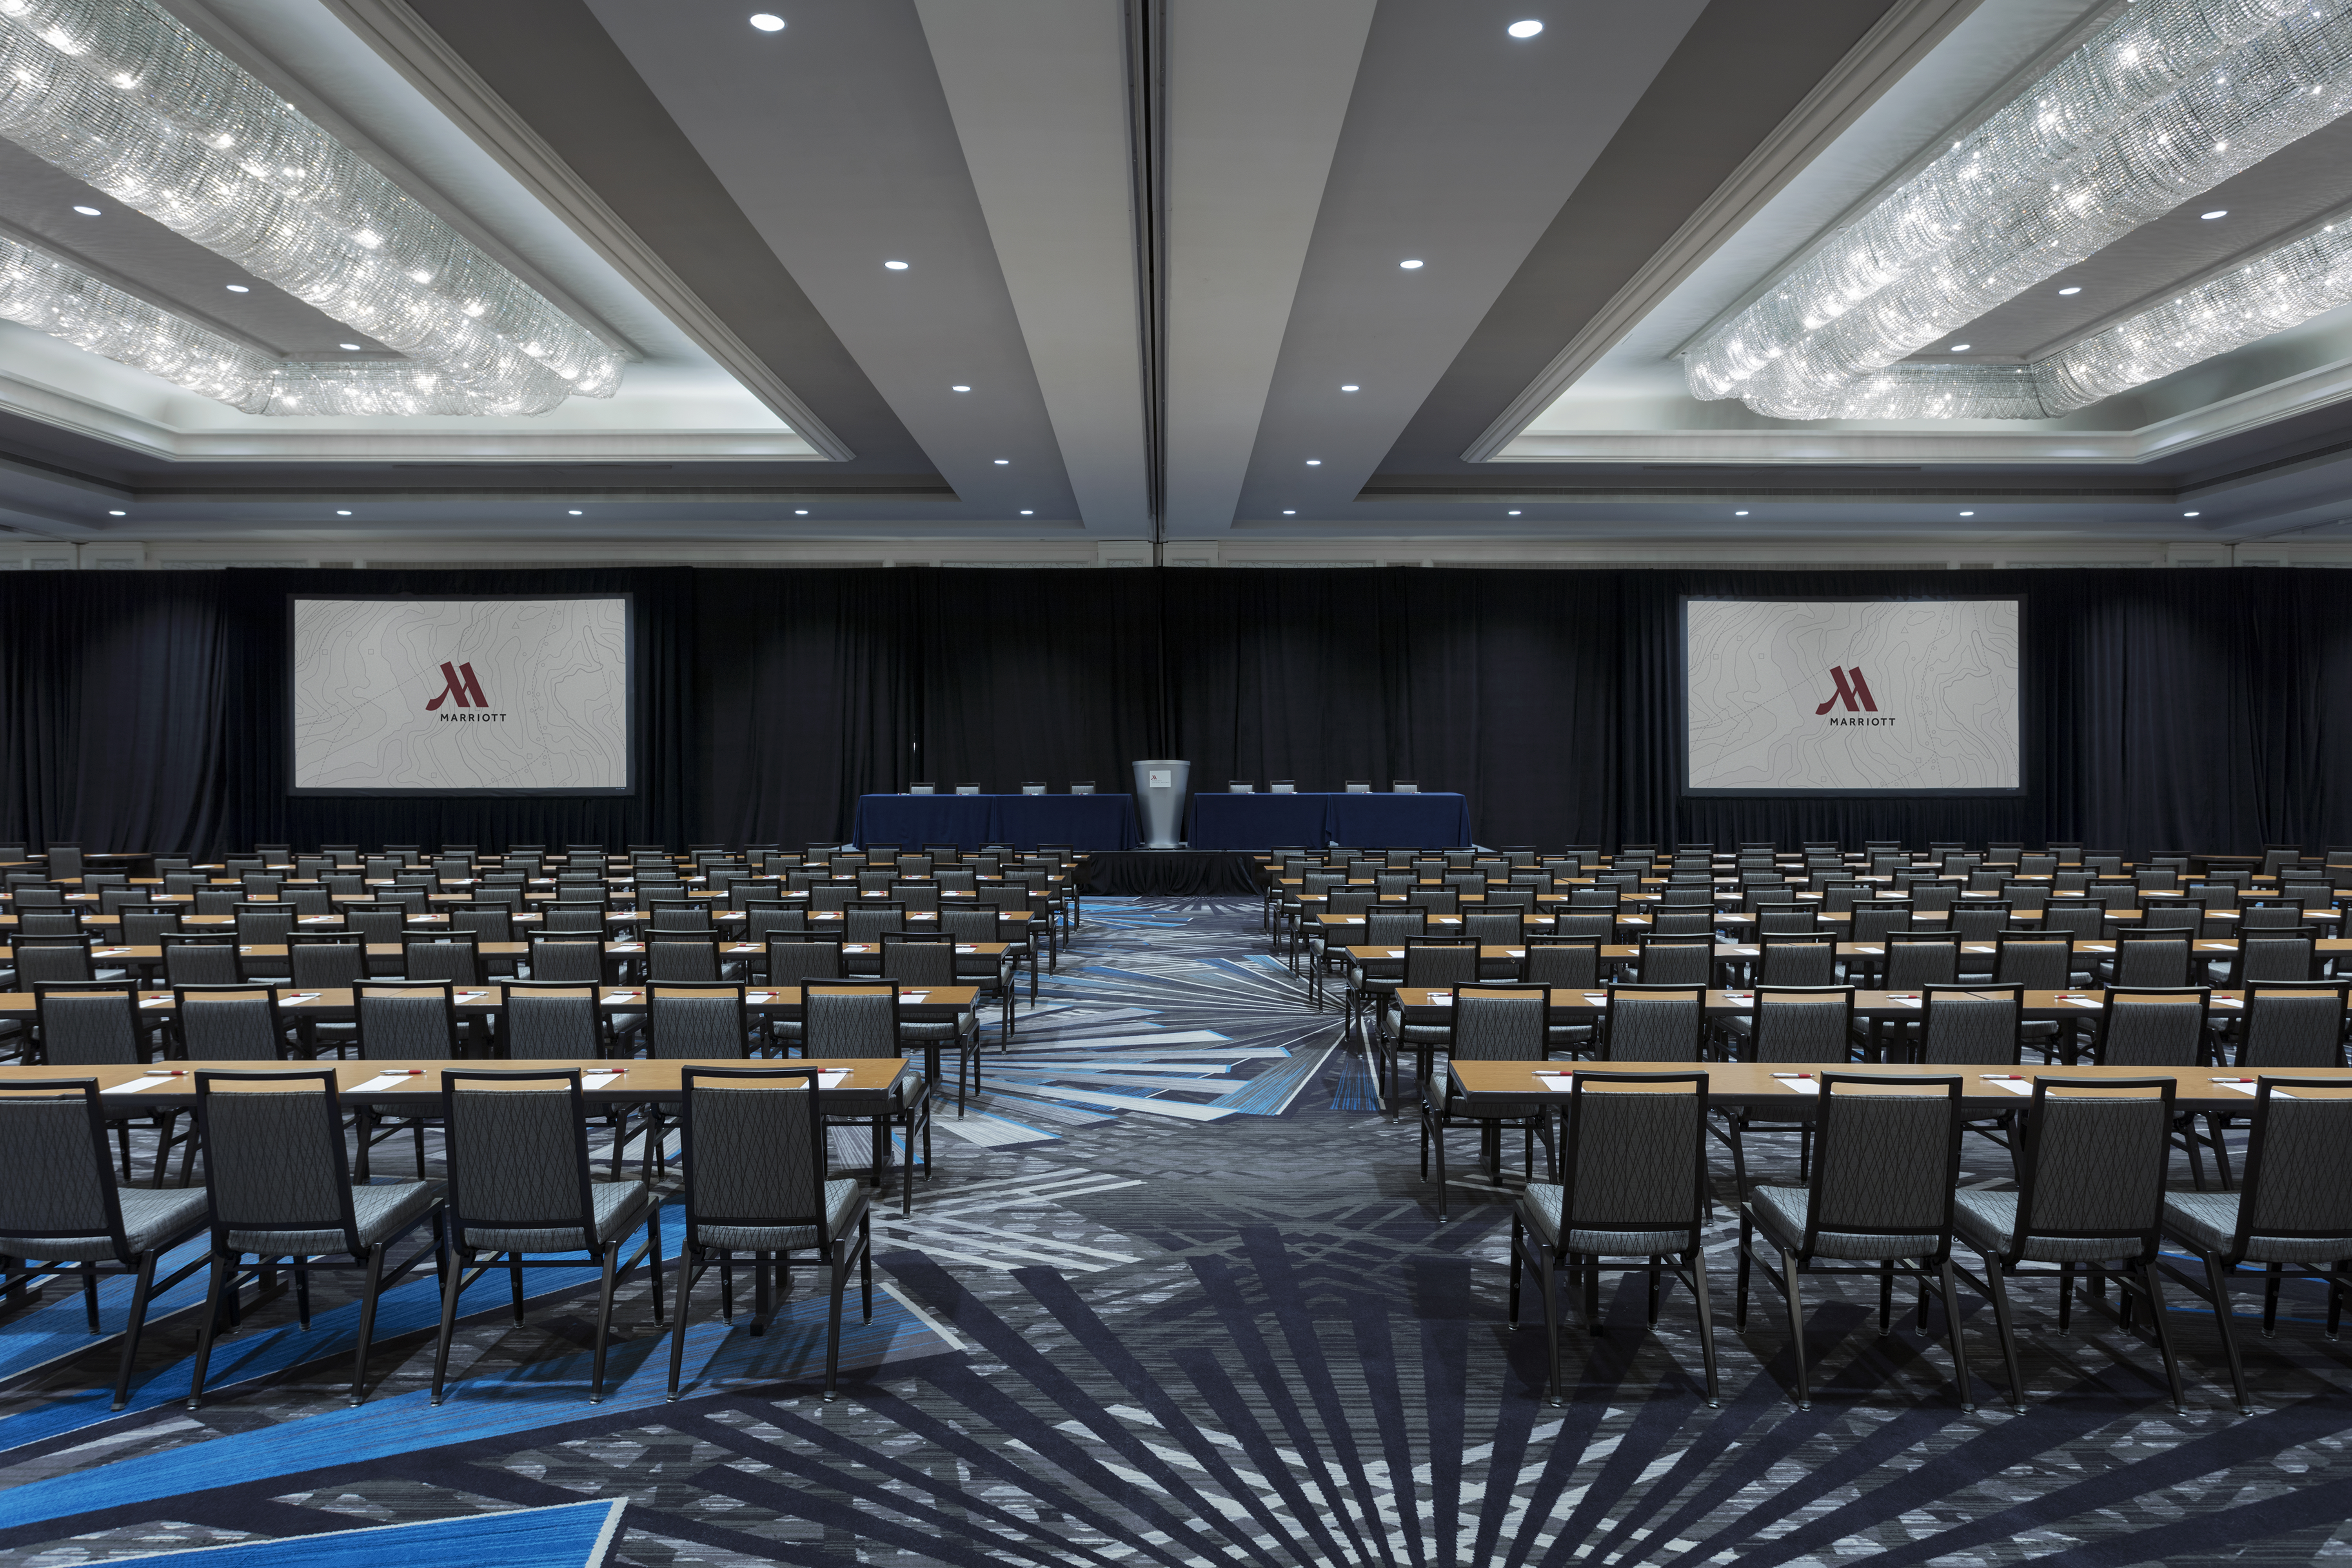 Carpeted ballroom with long rows of tables and chairs facing stage with podium